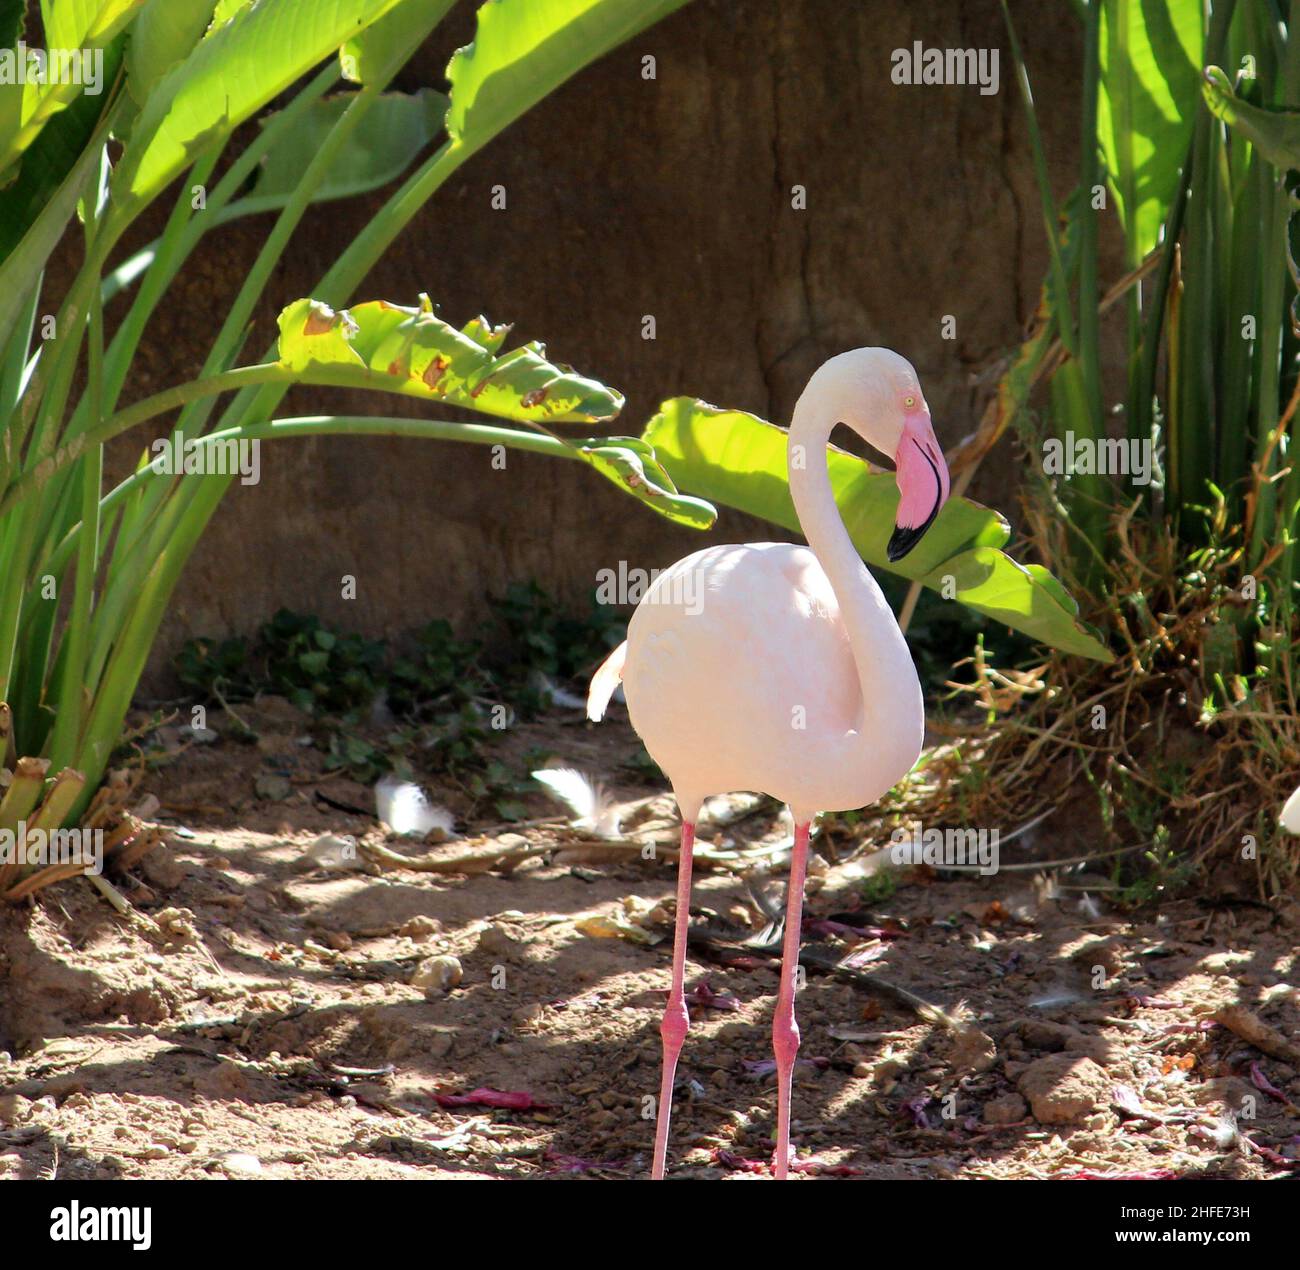 Greater flamingo (Phoenicopterus roseus) enjoying shade on a hot summer day in a zoo : (pix SShukla) Stock Photo